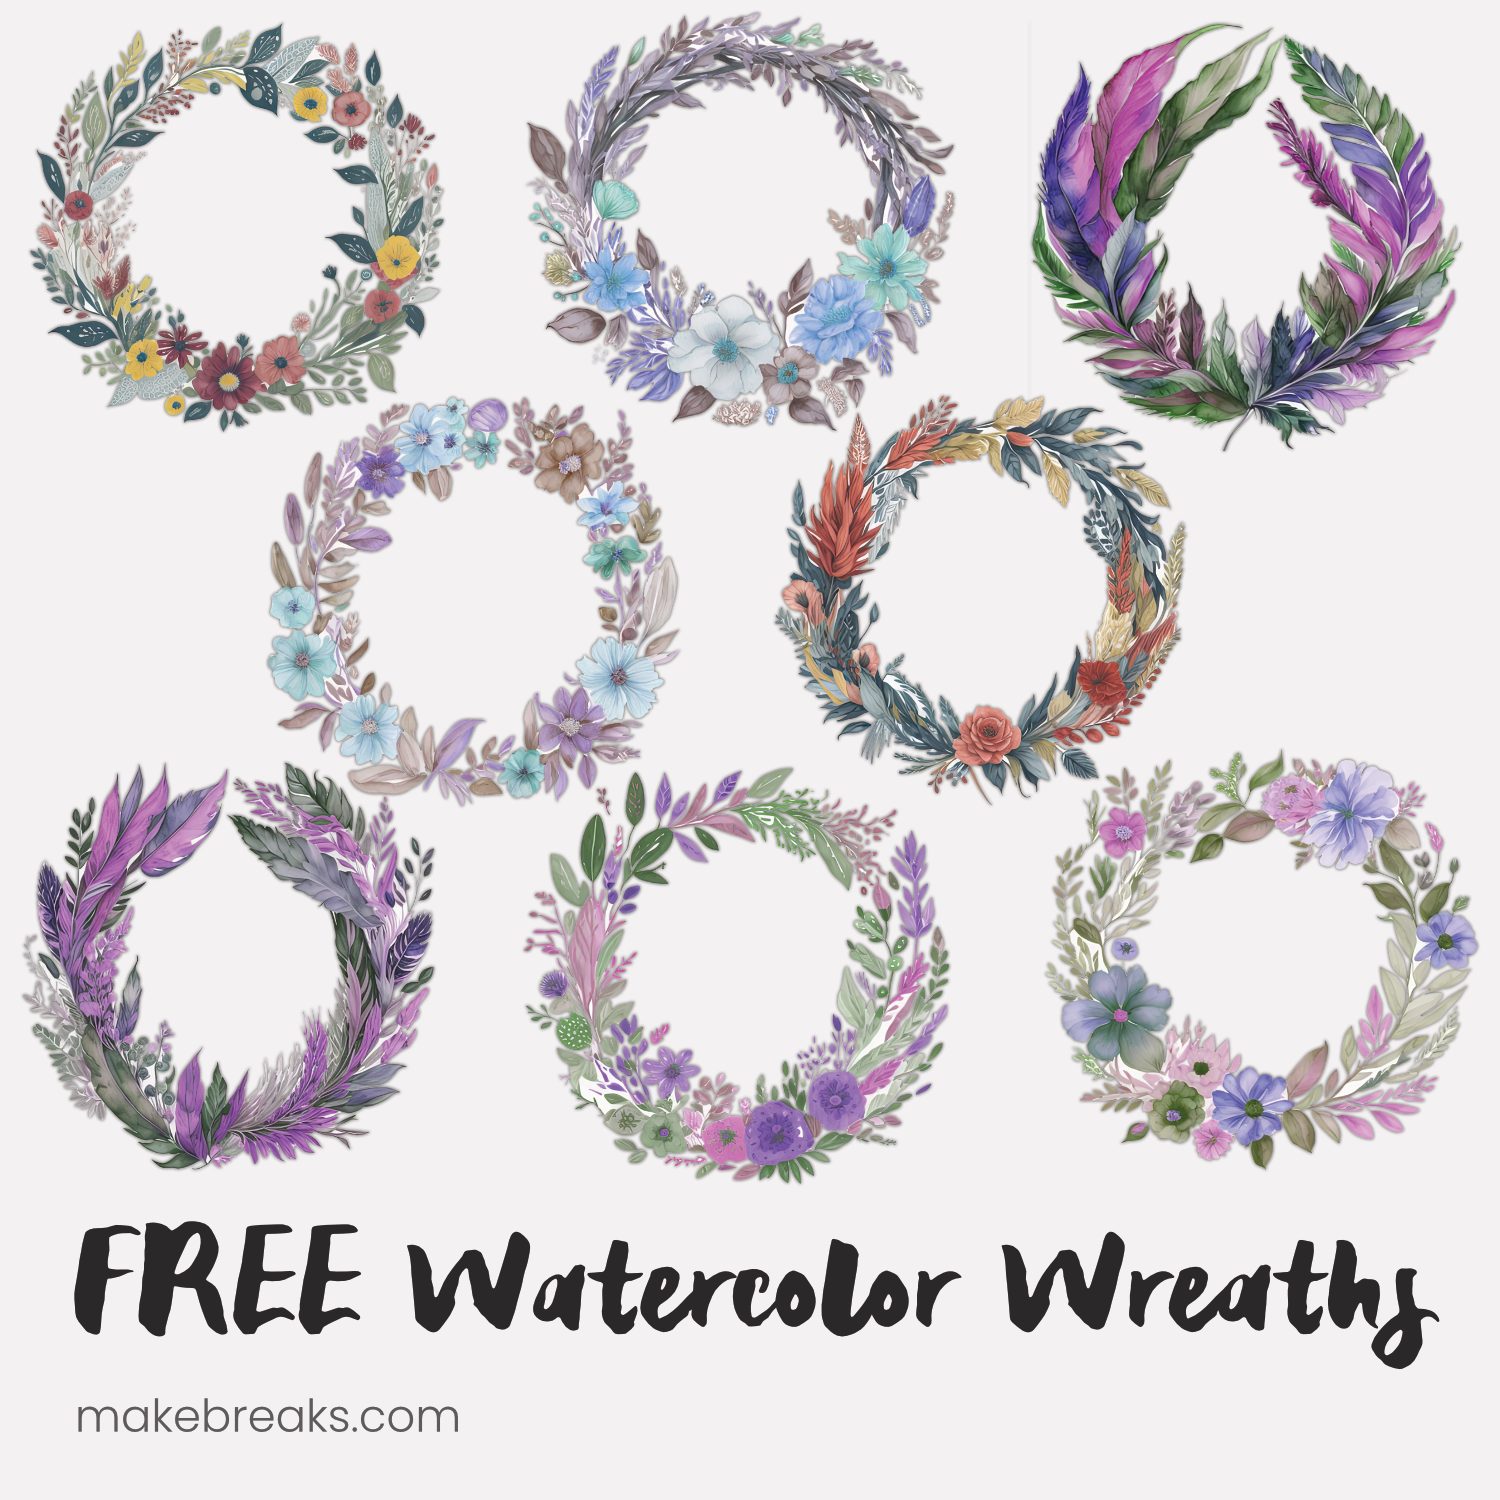 Free Watercolor Floral Wreaths for Digital Planners & Scrapbooking